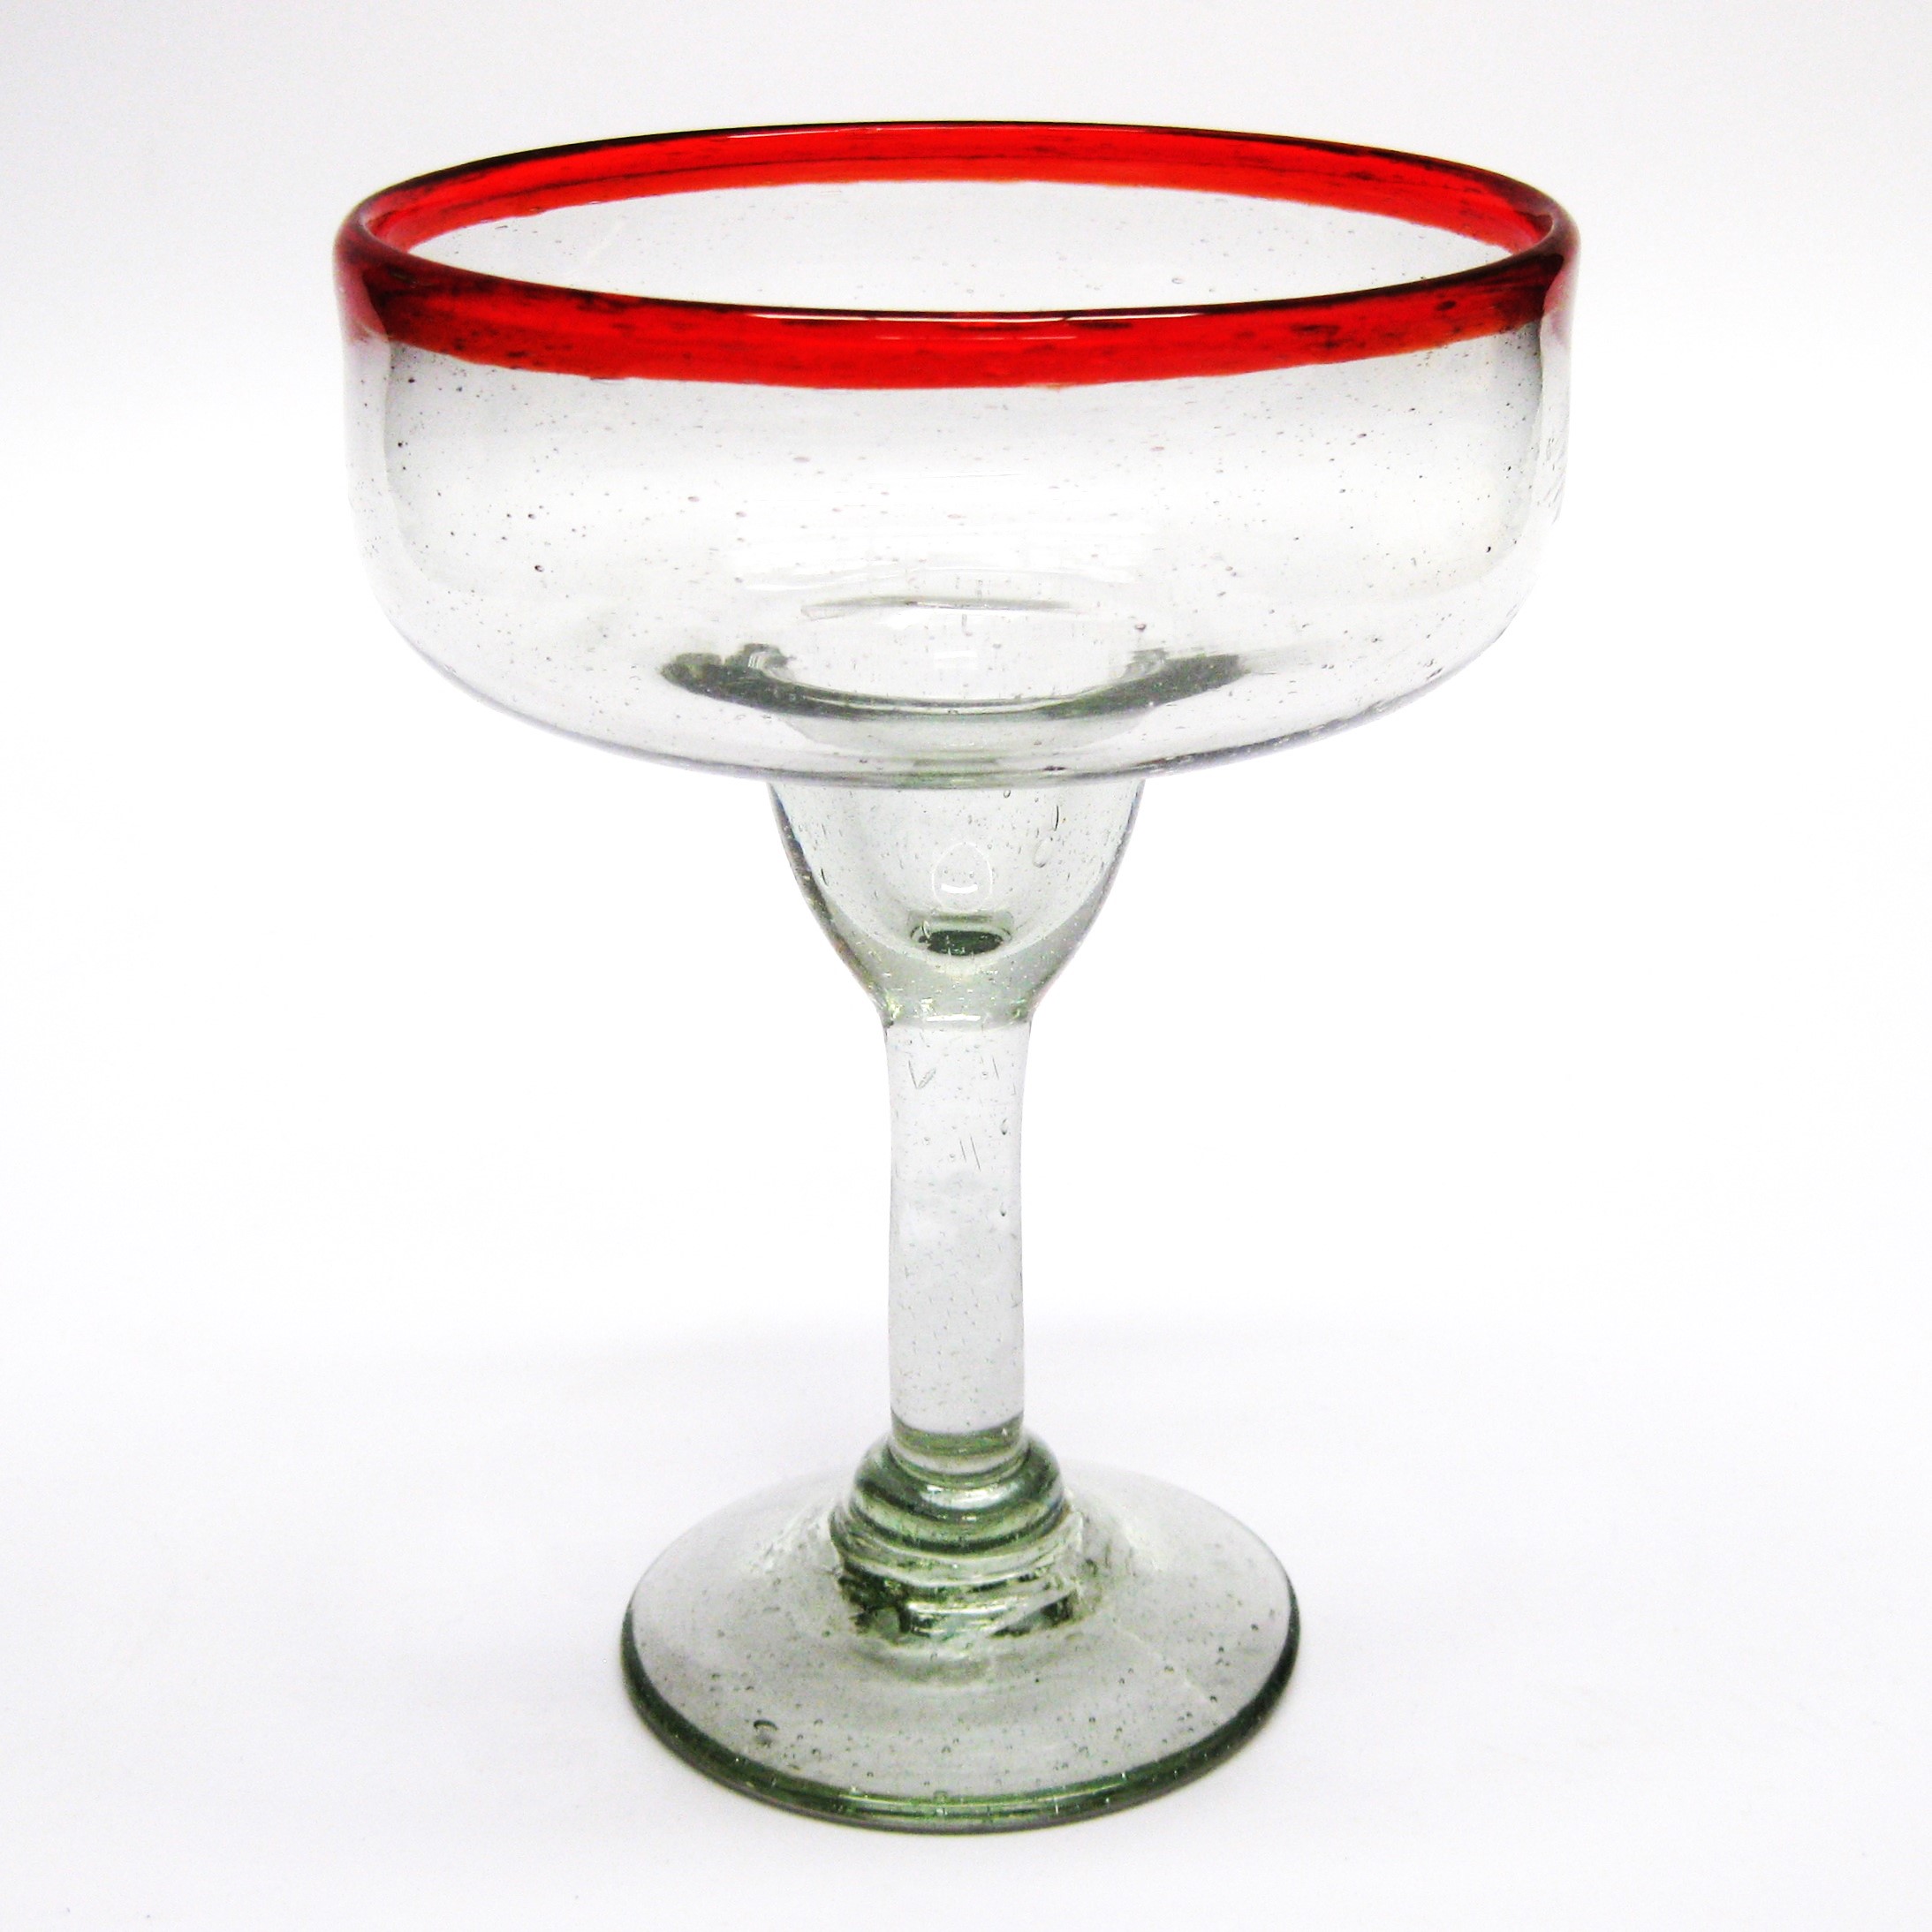 Wholesale MEXICAN GLASSWARE / Ruby Red Rim 14 oz Large Margarita Glasses  / For the margarita lover, these enjoyable large sized margarita glasses feature a cheerful ruby red rim.